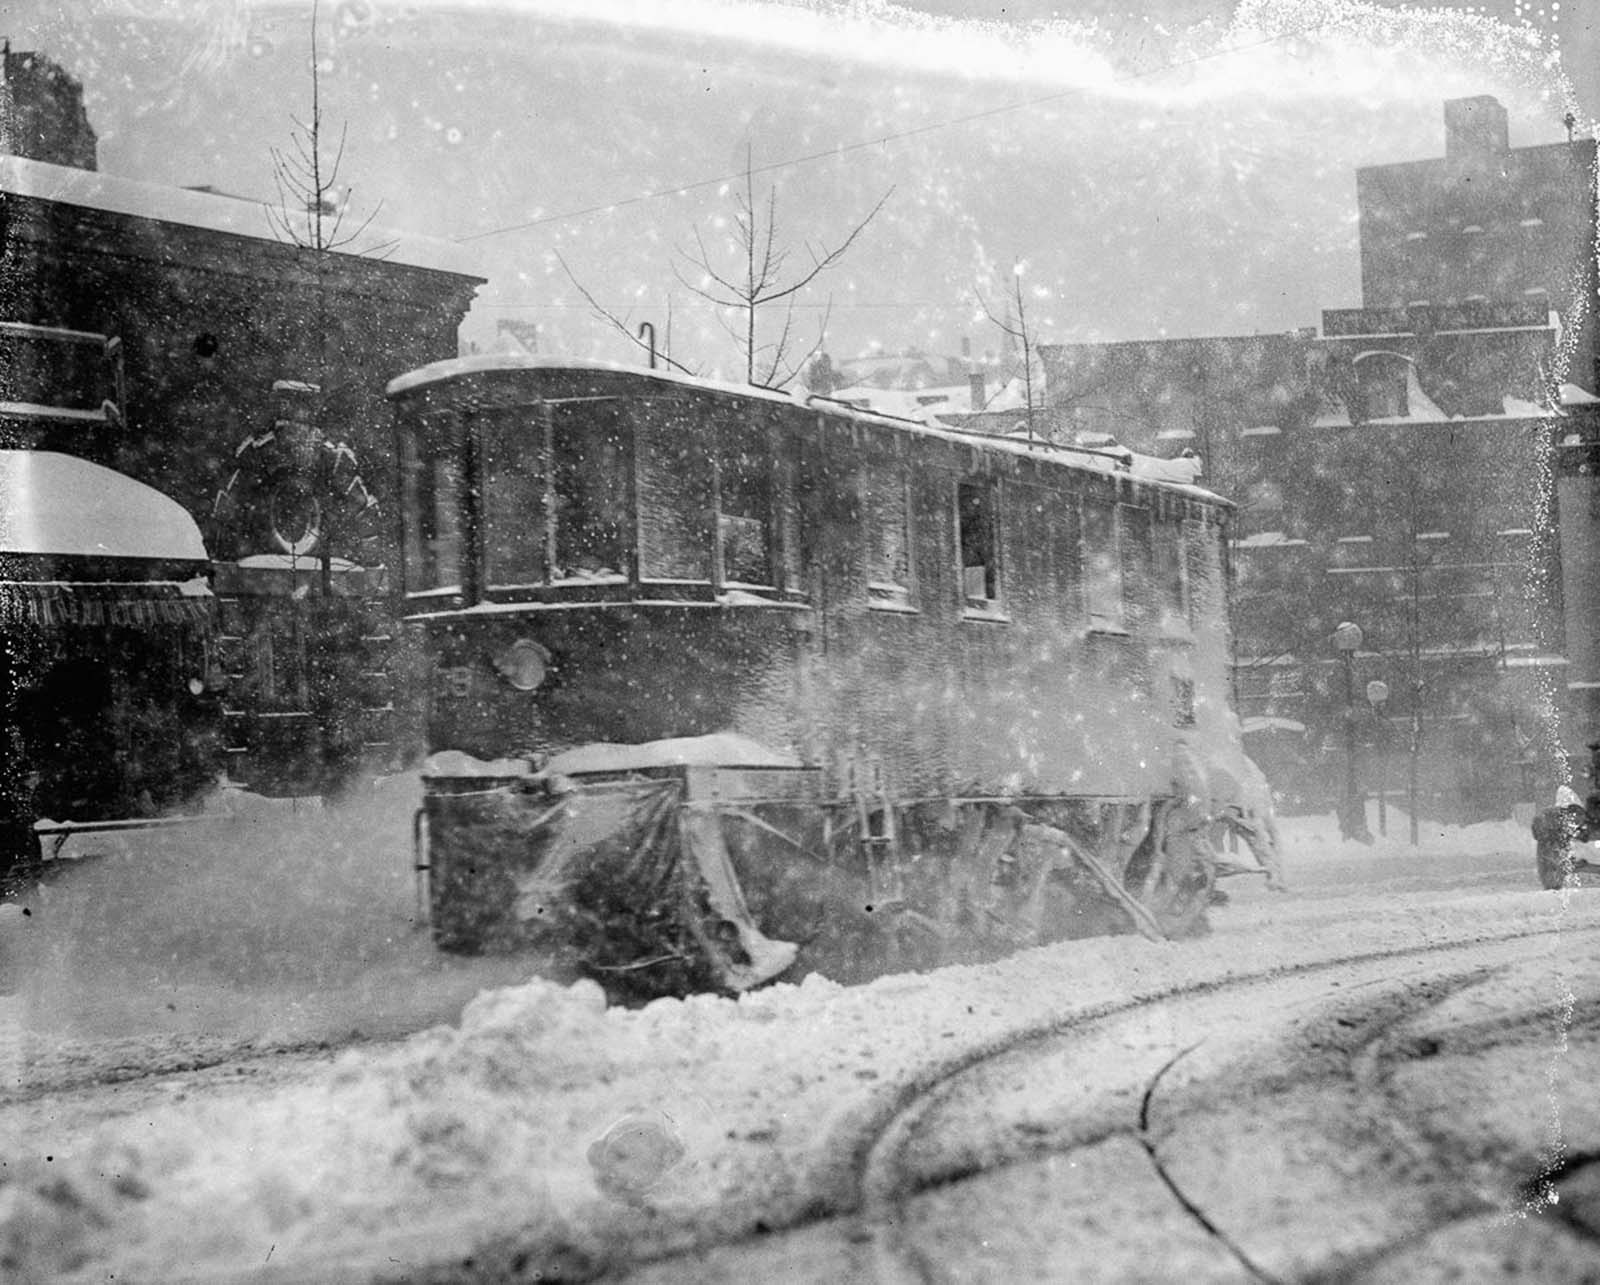 The Knickerbocker Storm: Historical Photos of the deadliest Blizzard in the Washington D.C. History